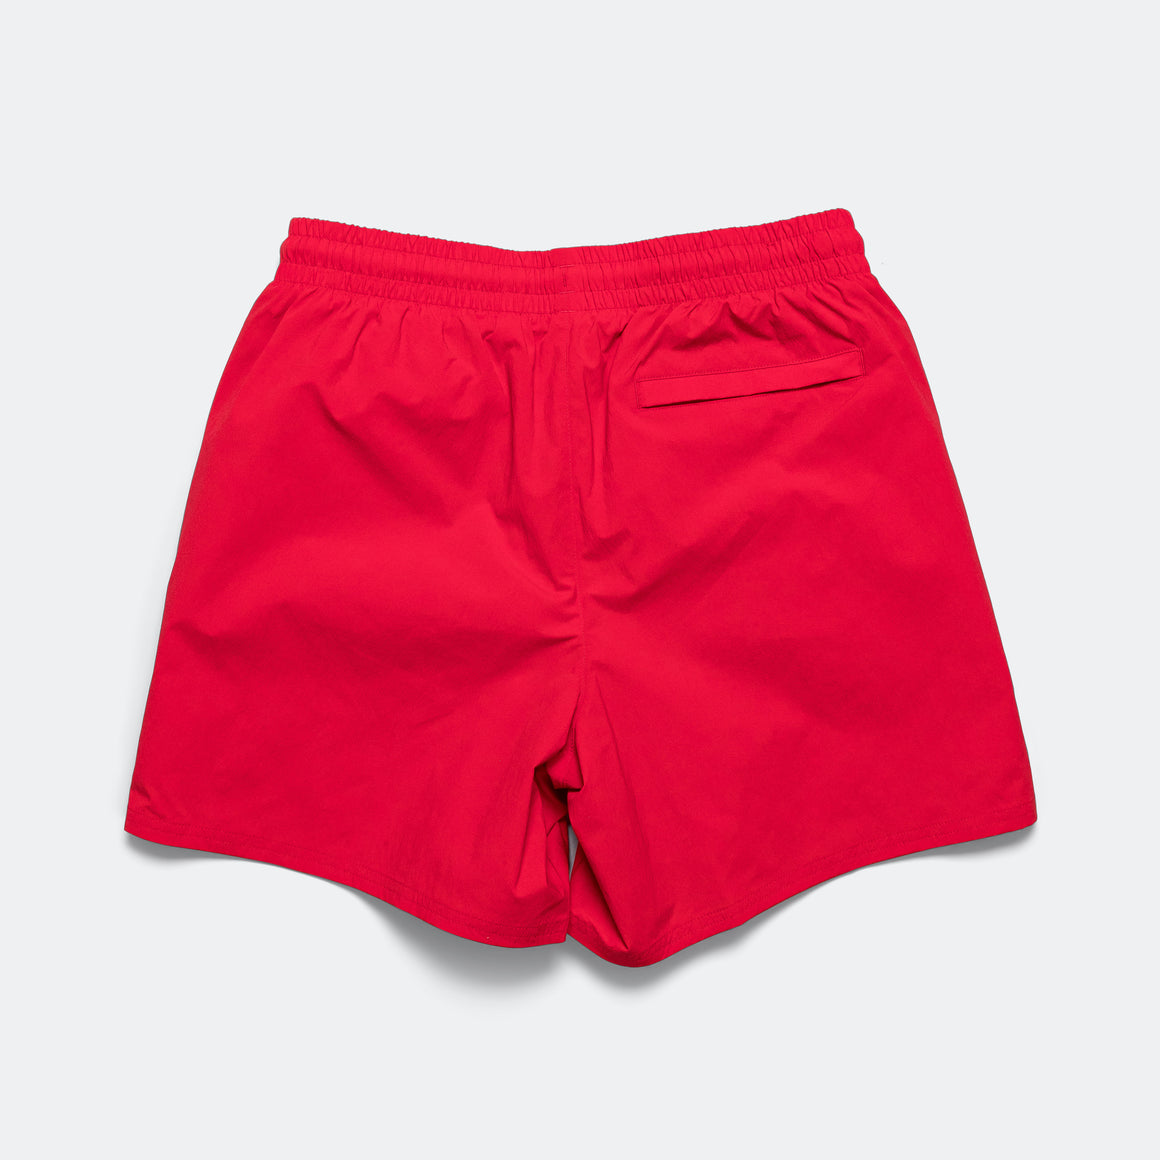 New Balance - Archive Stretch Woven Short - Team Red - UP THERE